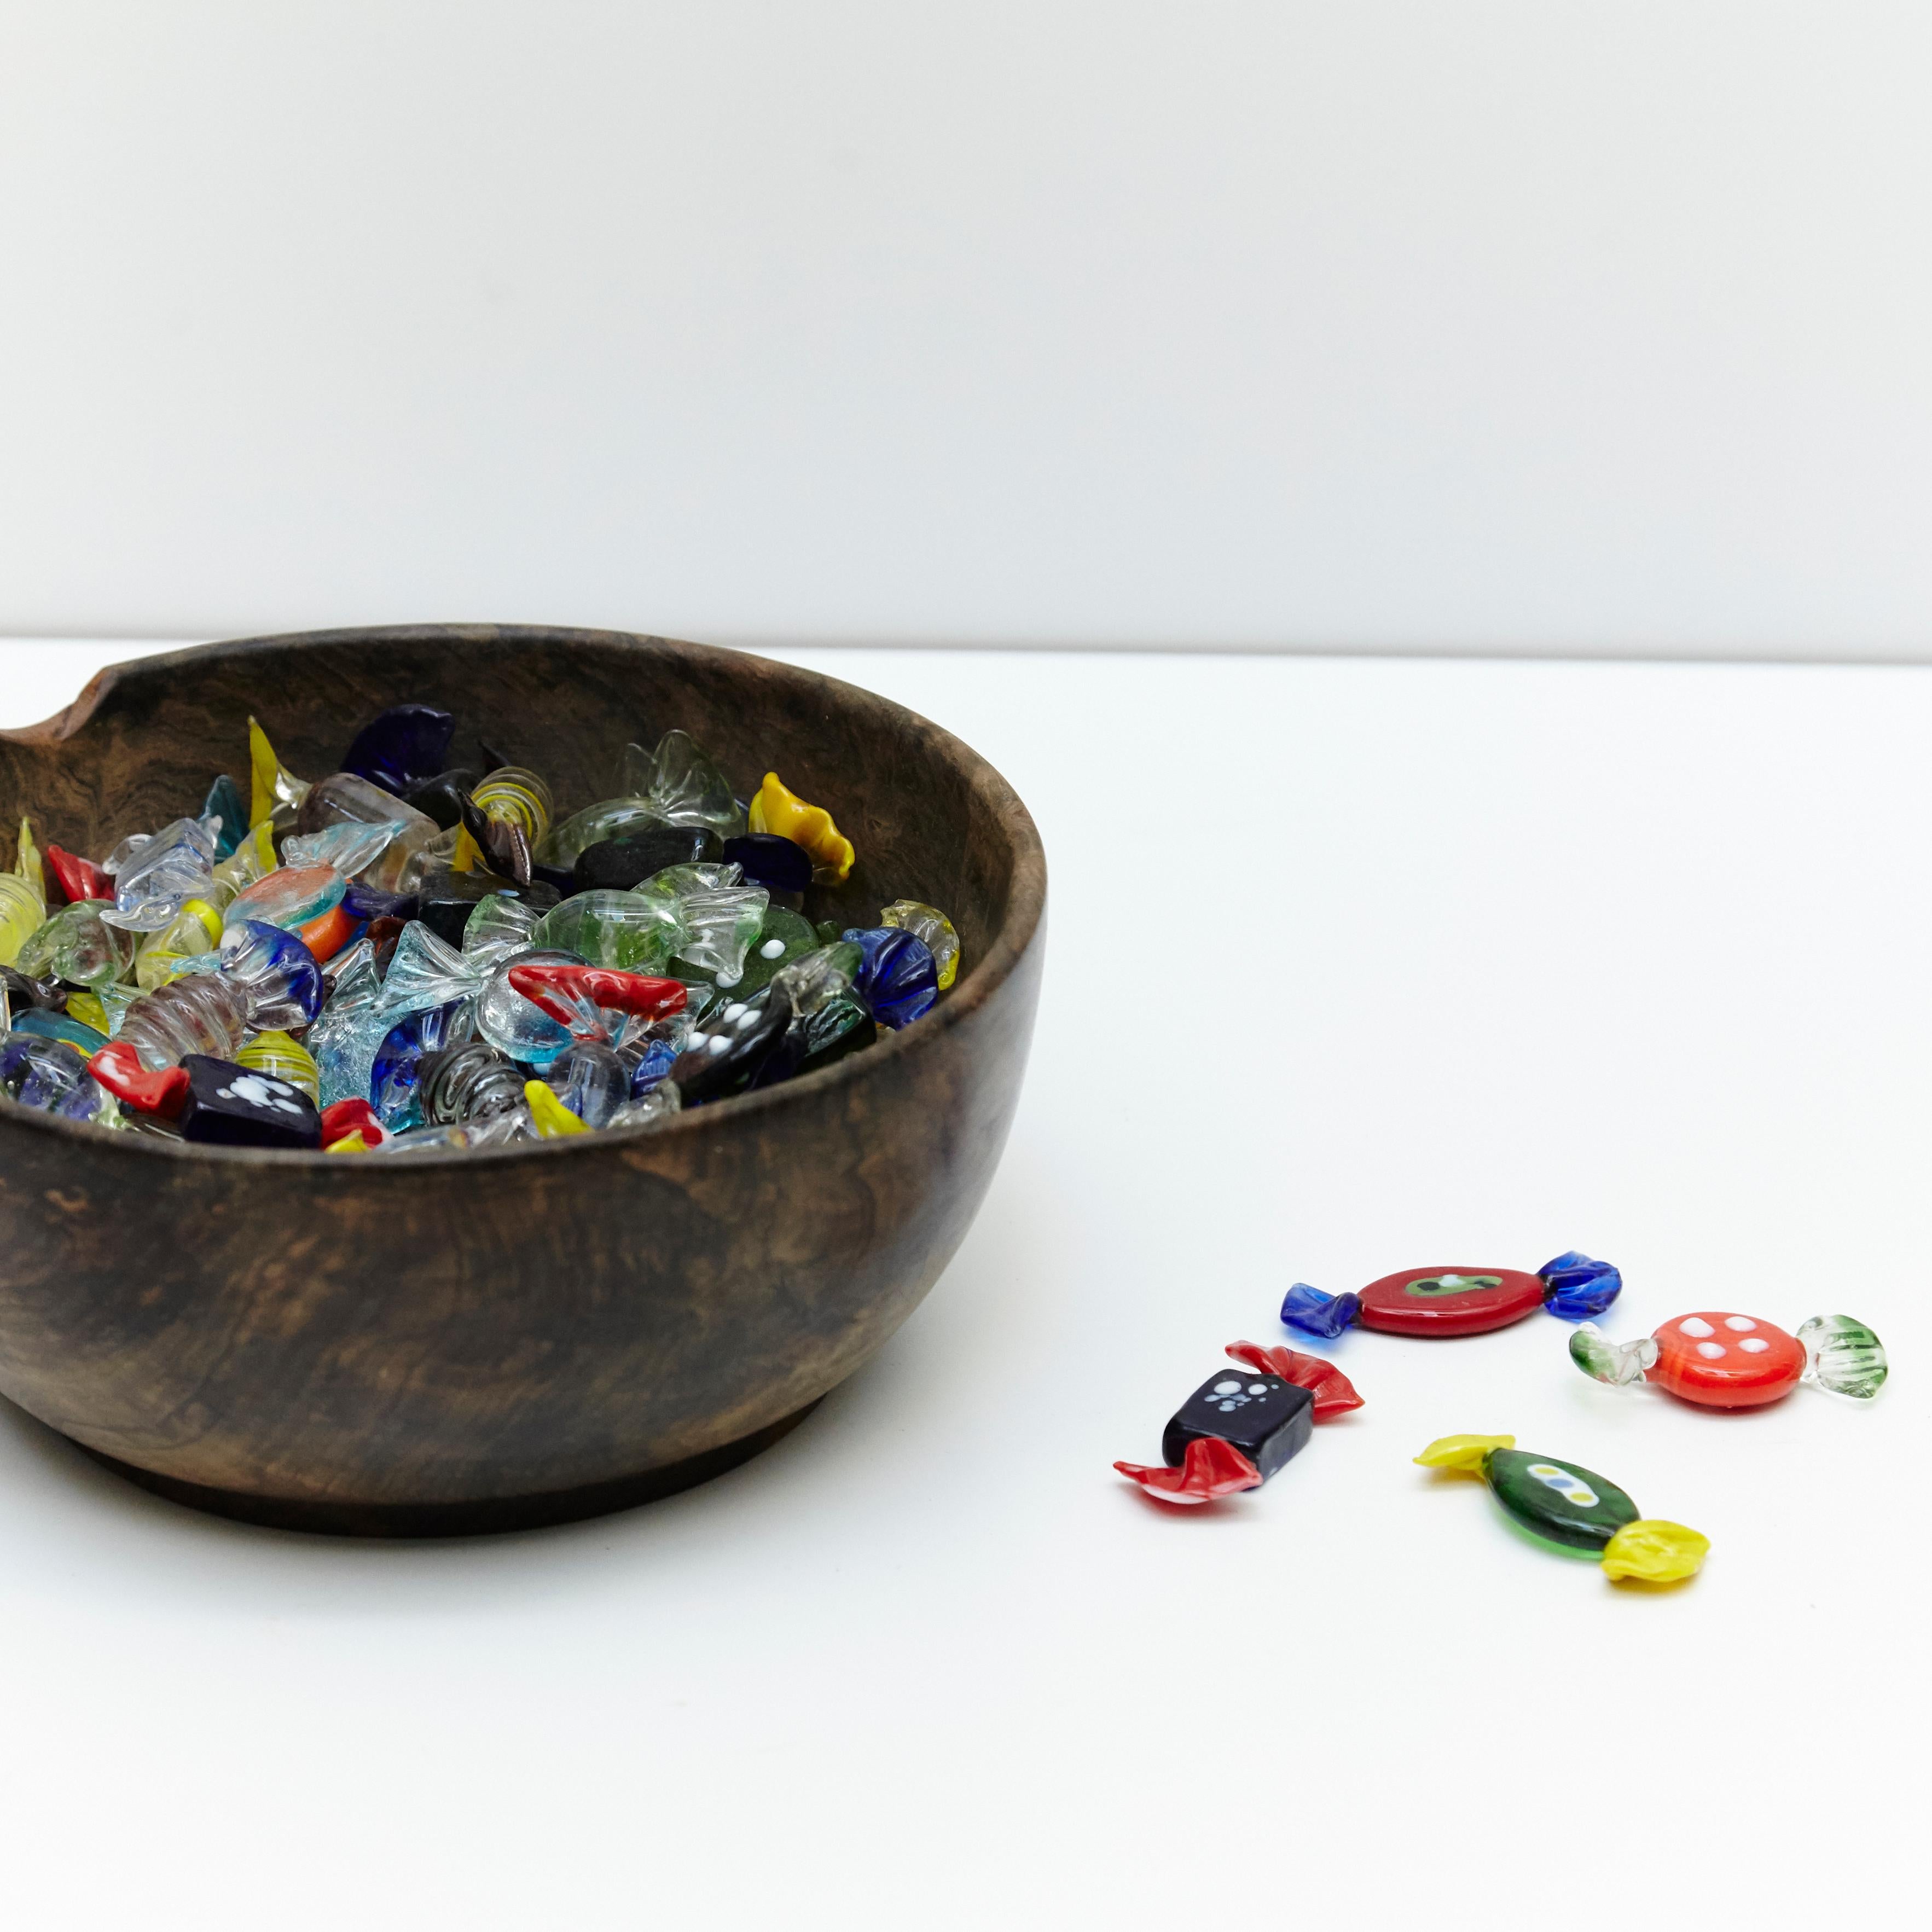 Late 20th Century Large Set of Murano Glass Candy Small Sculptures on Olive Wood Bowl, circa 1970